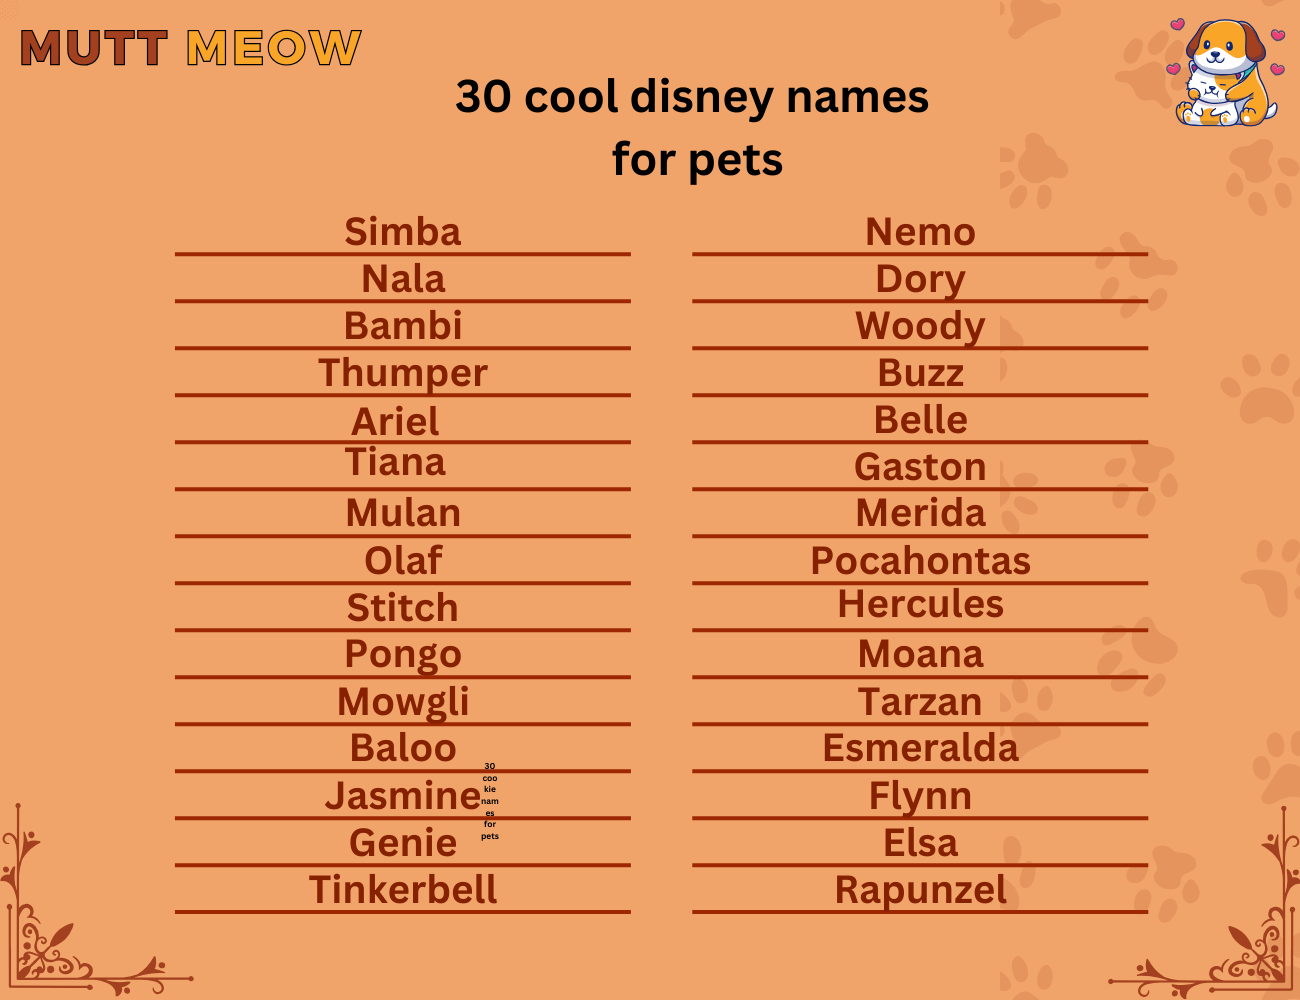 30 cool disney names for pets